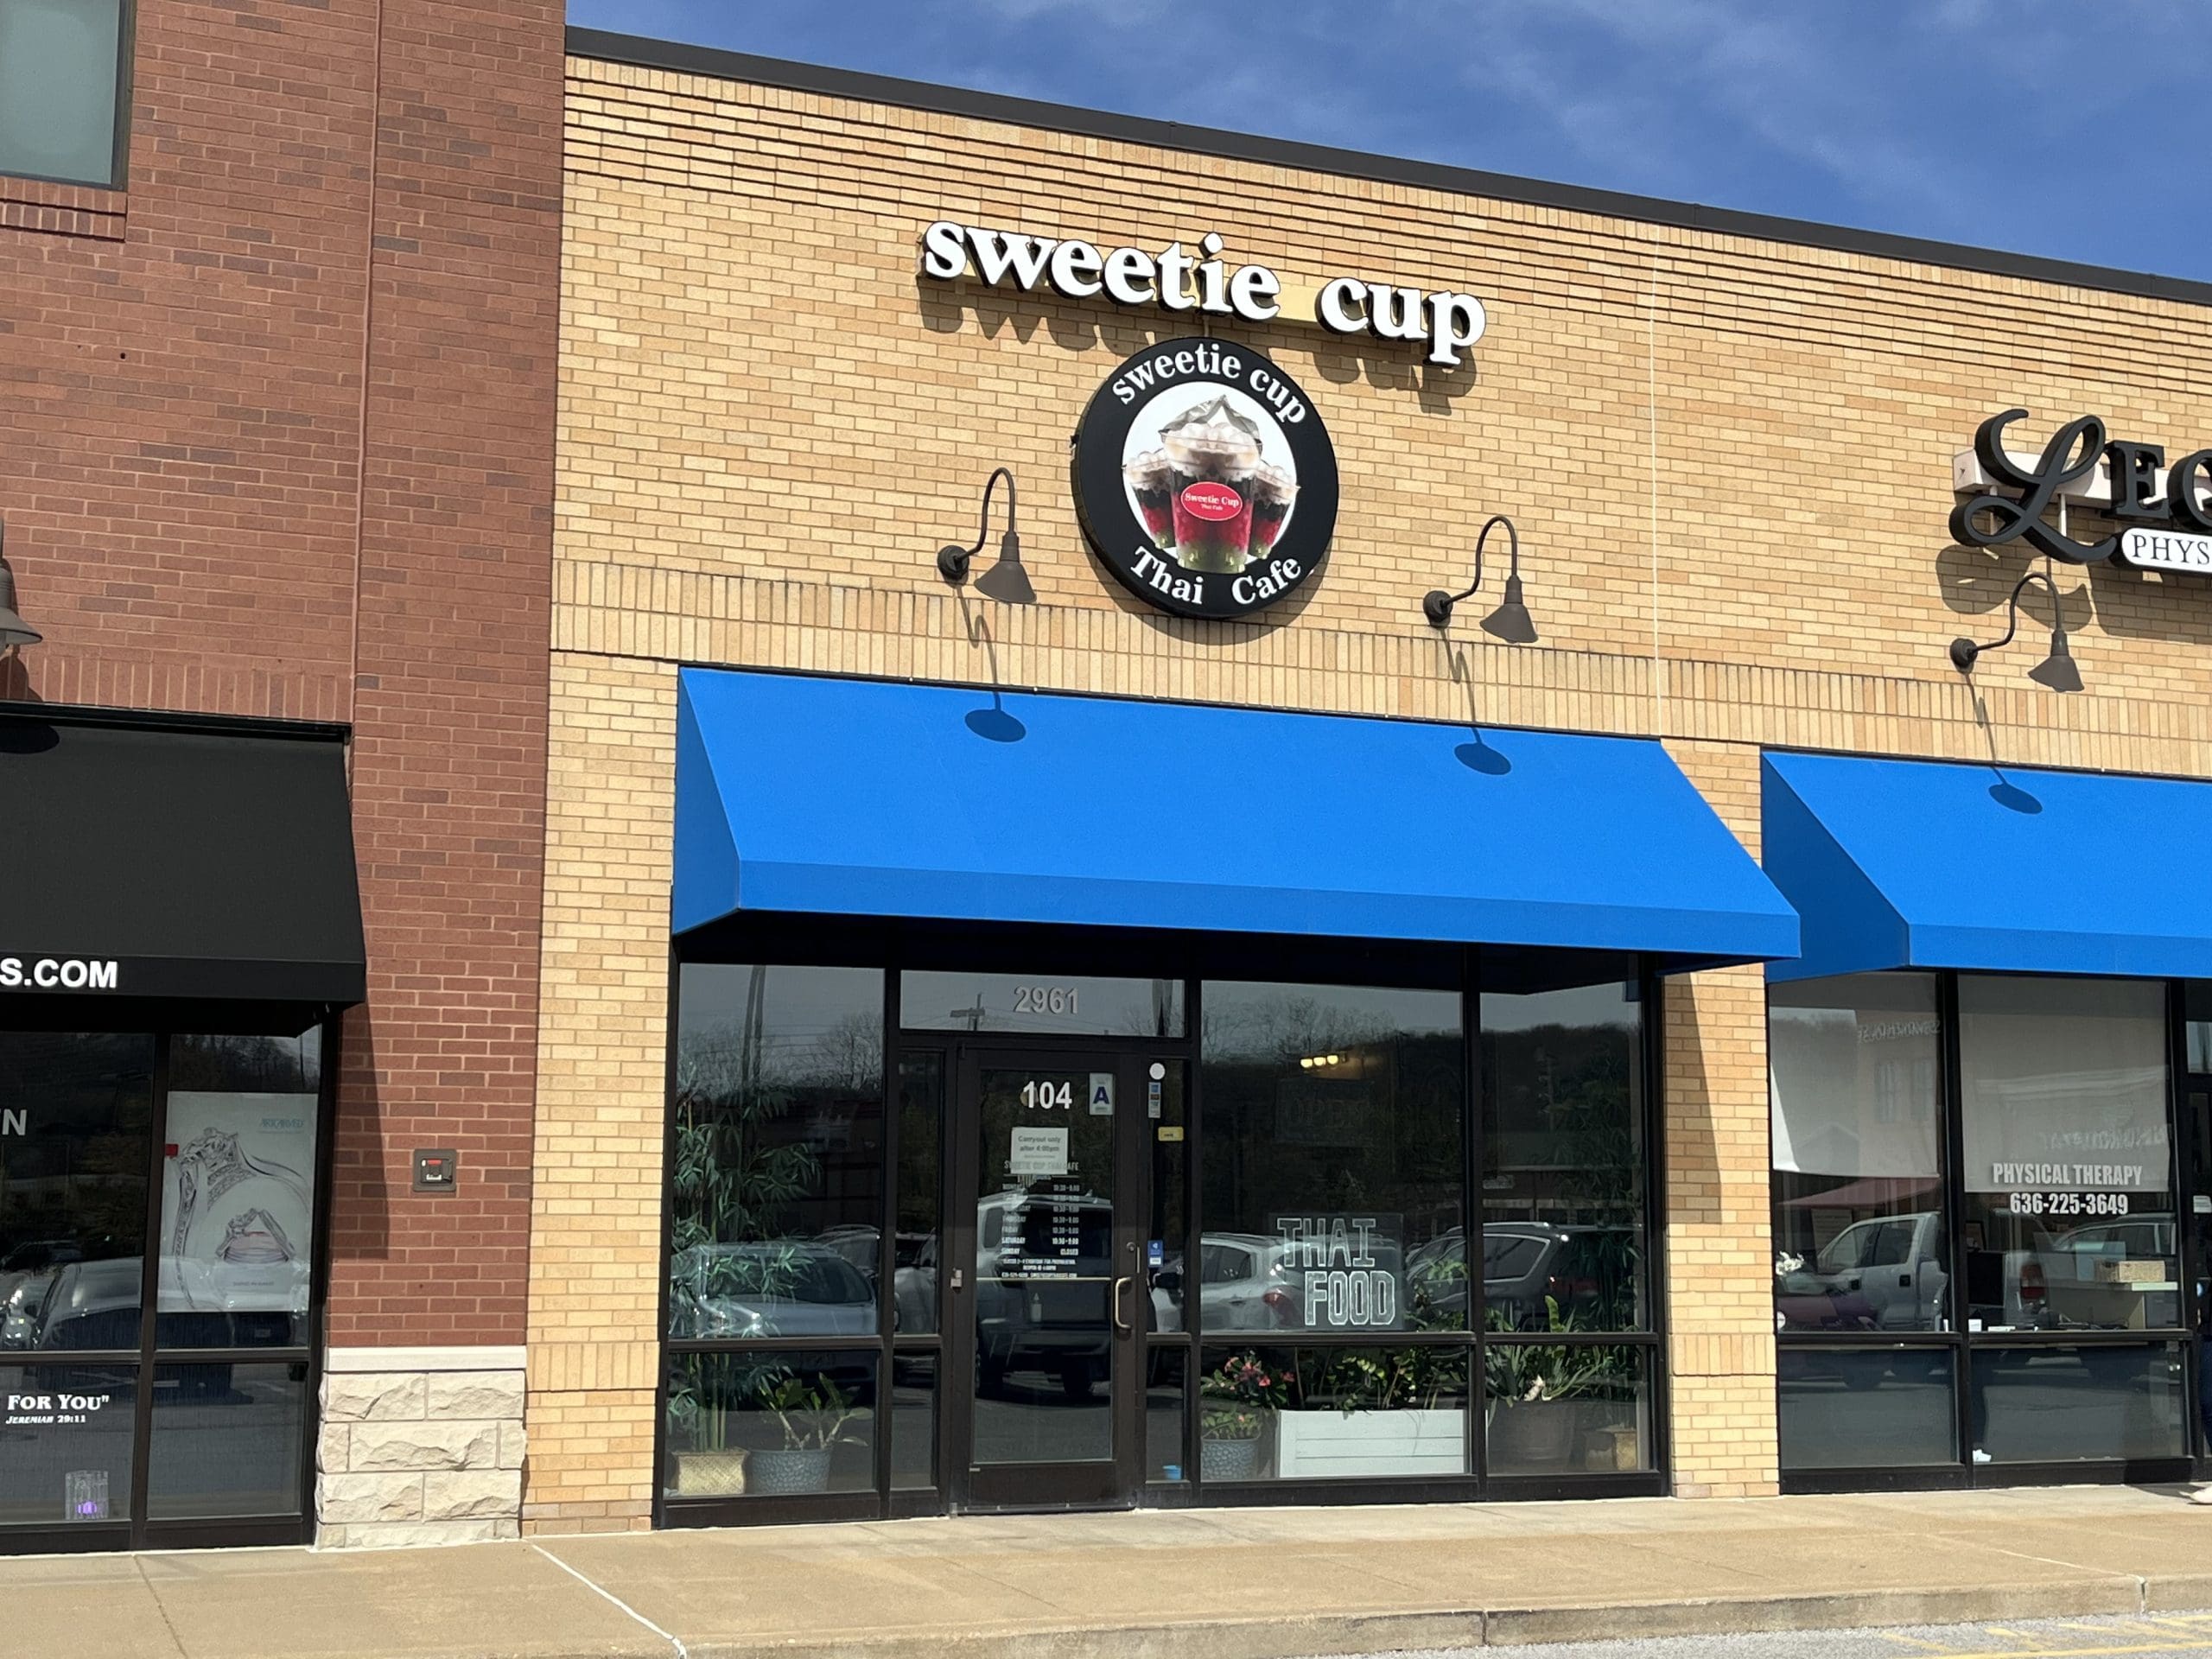 Sweetie Cup Thai Cafe Applies for Liquor License